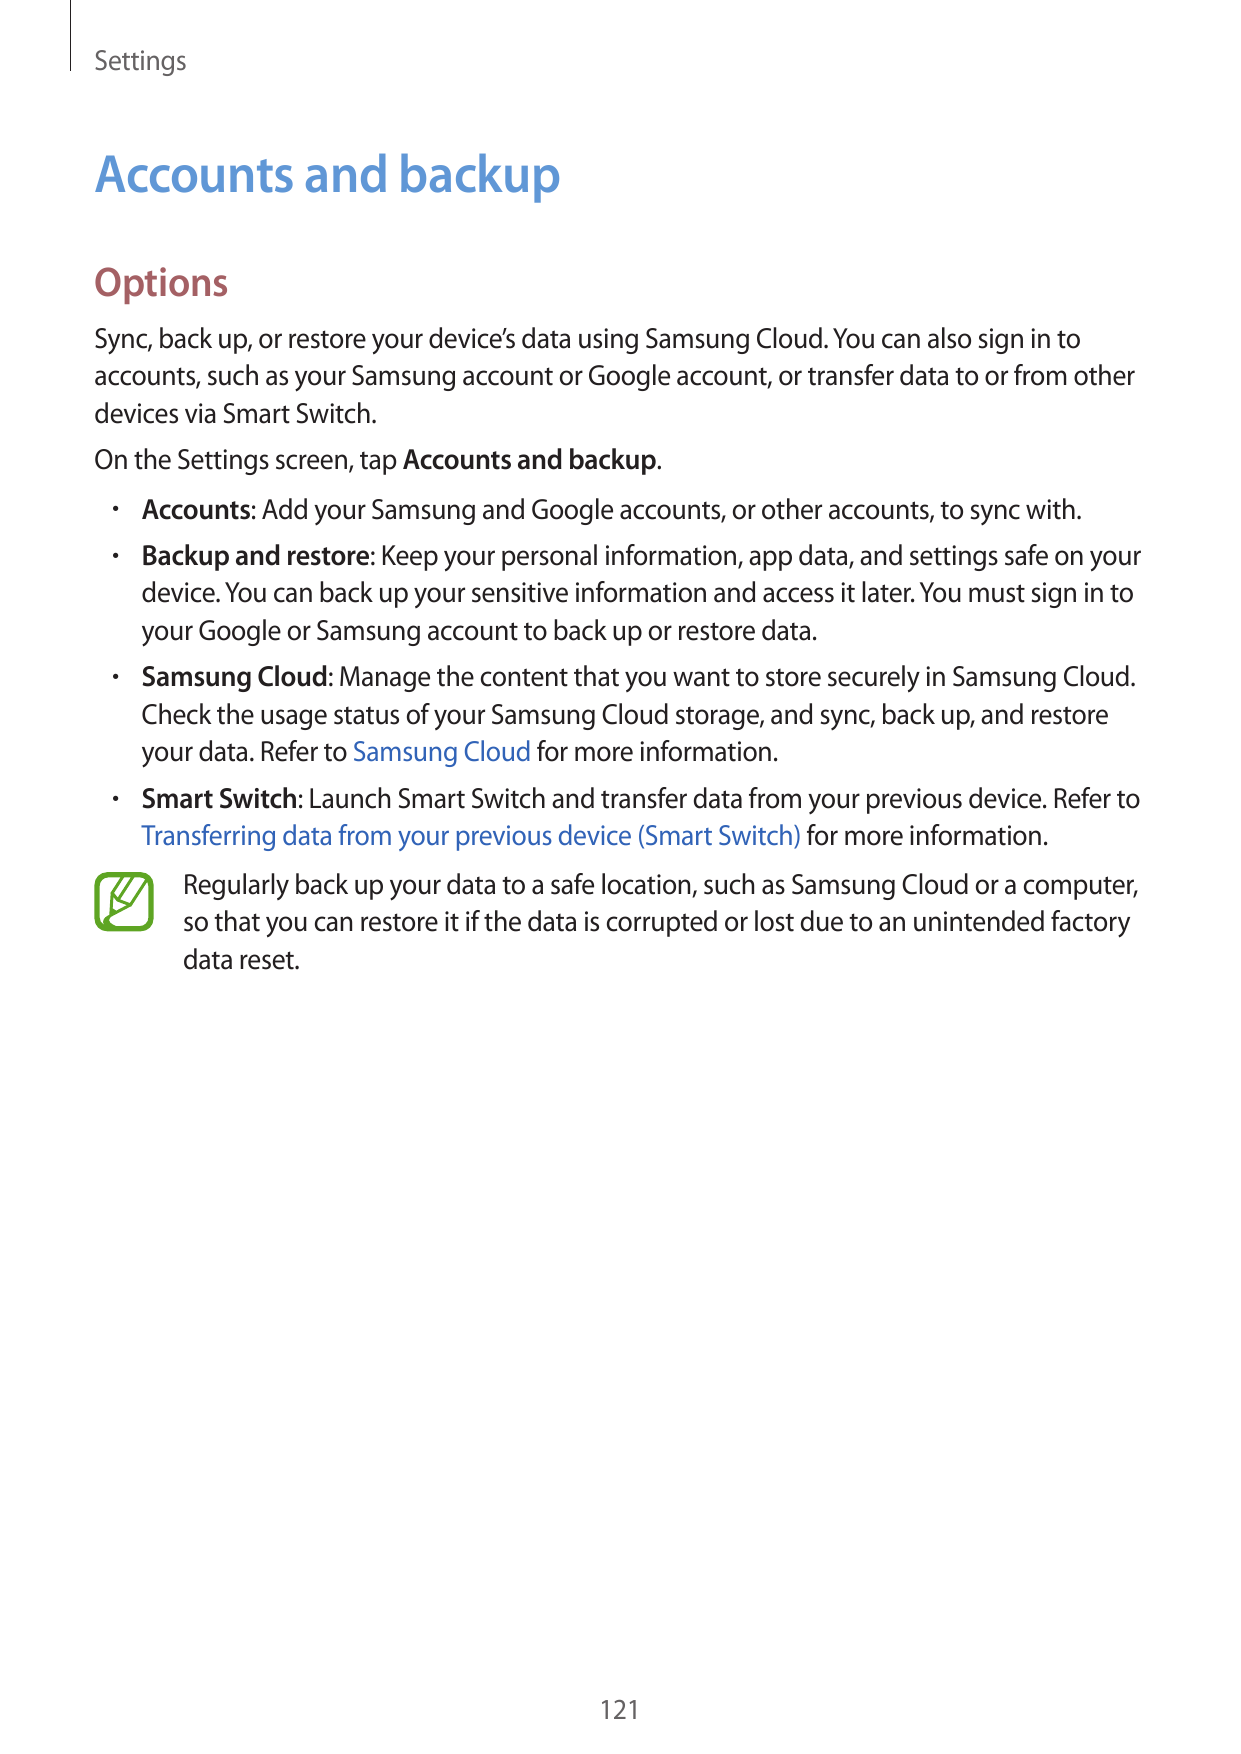 SettingsAccounts and backupOptionsSync, back up, or restore your device’s data using Samsung Cloud. You can also sign in toaccou